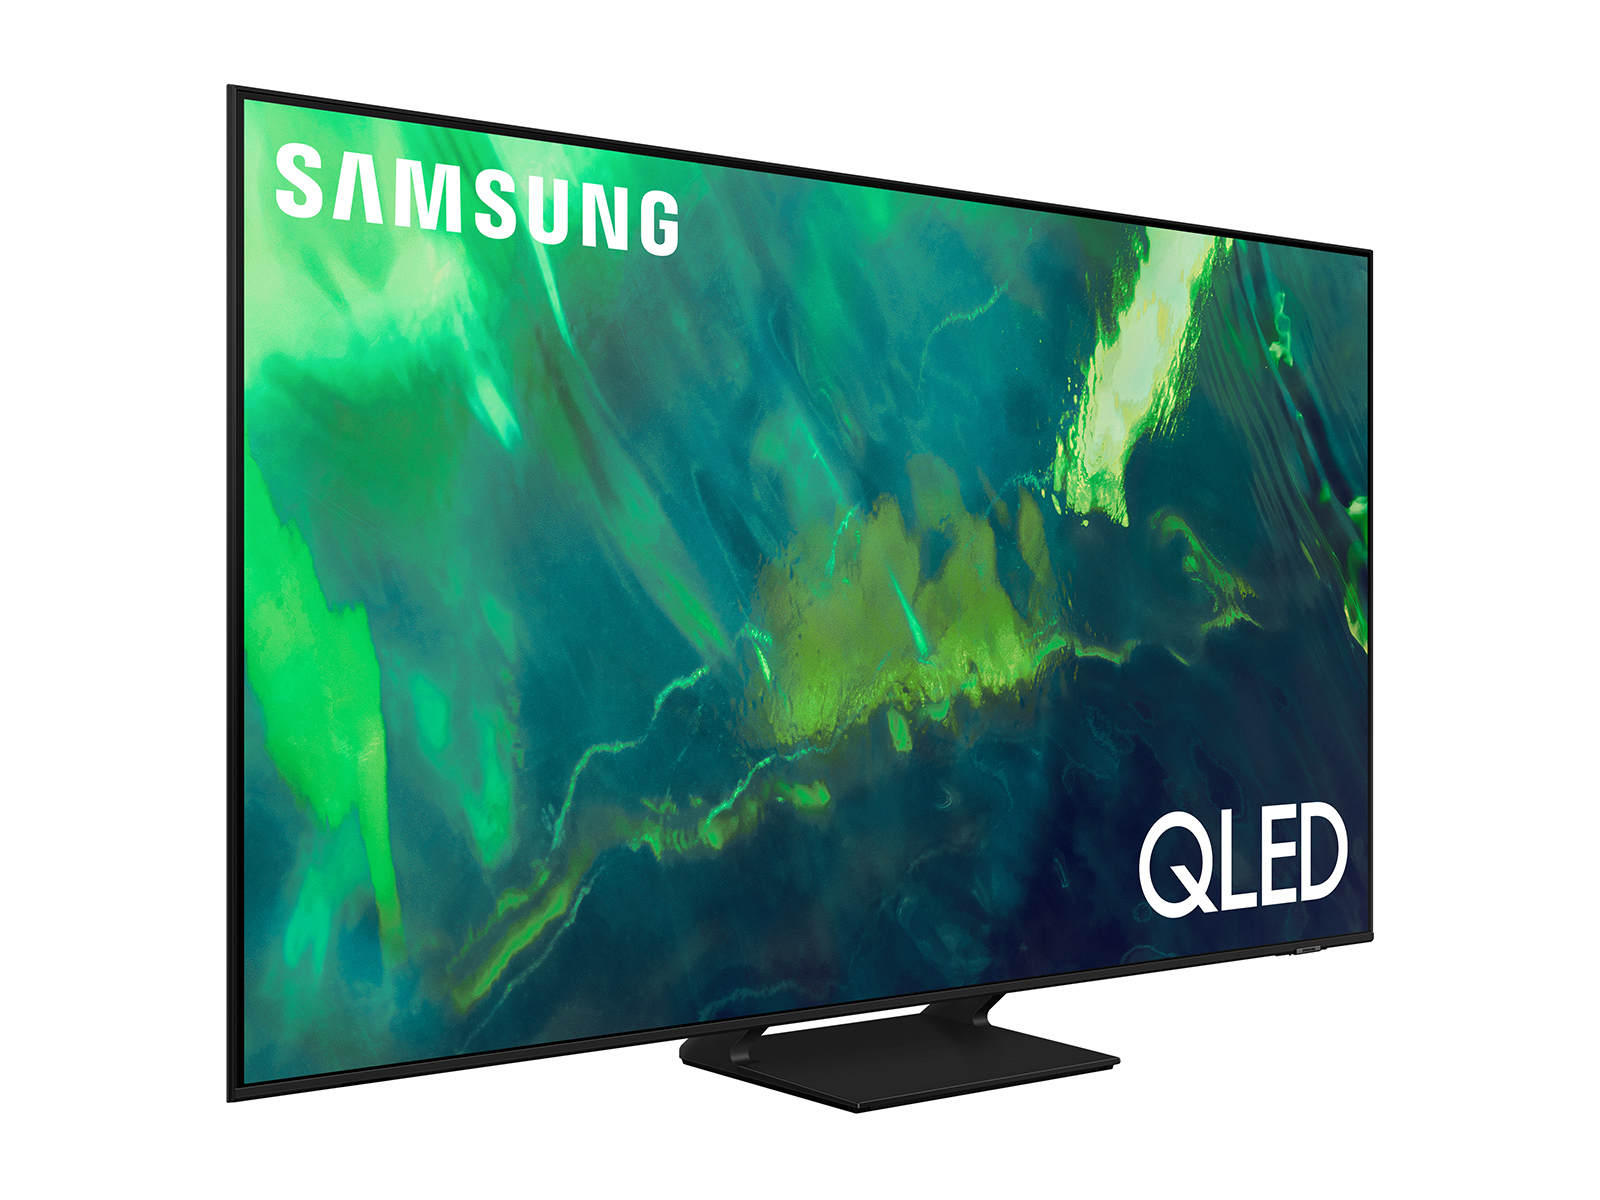 launches its own QLED 4K TVs, starting at $800